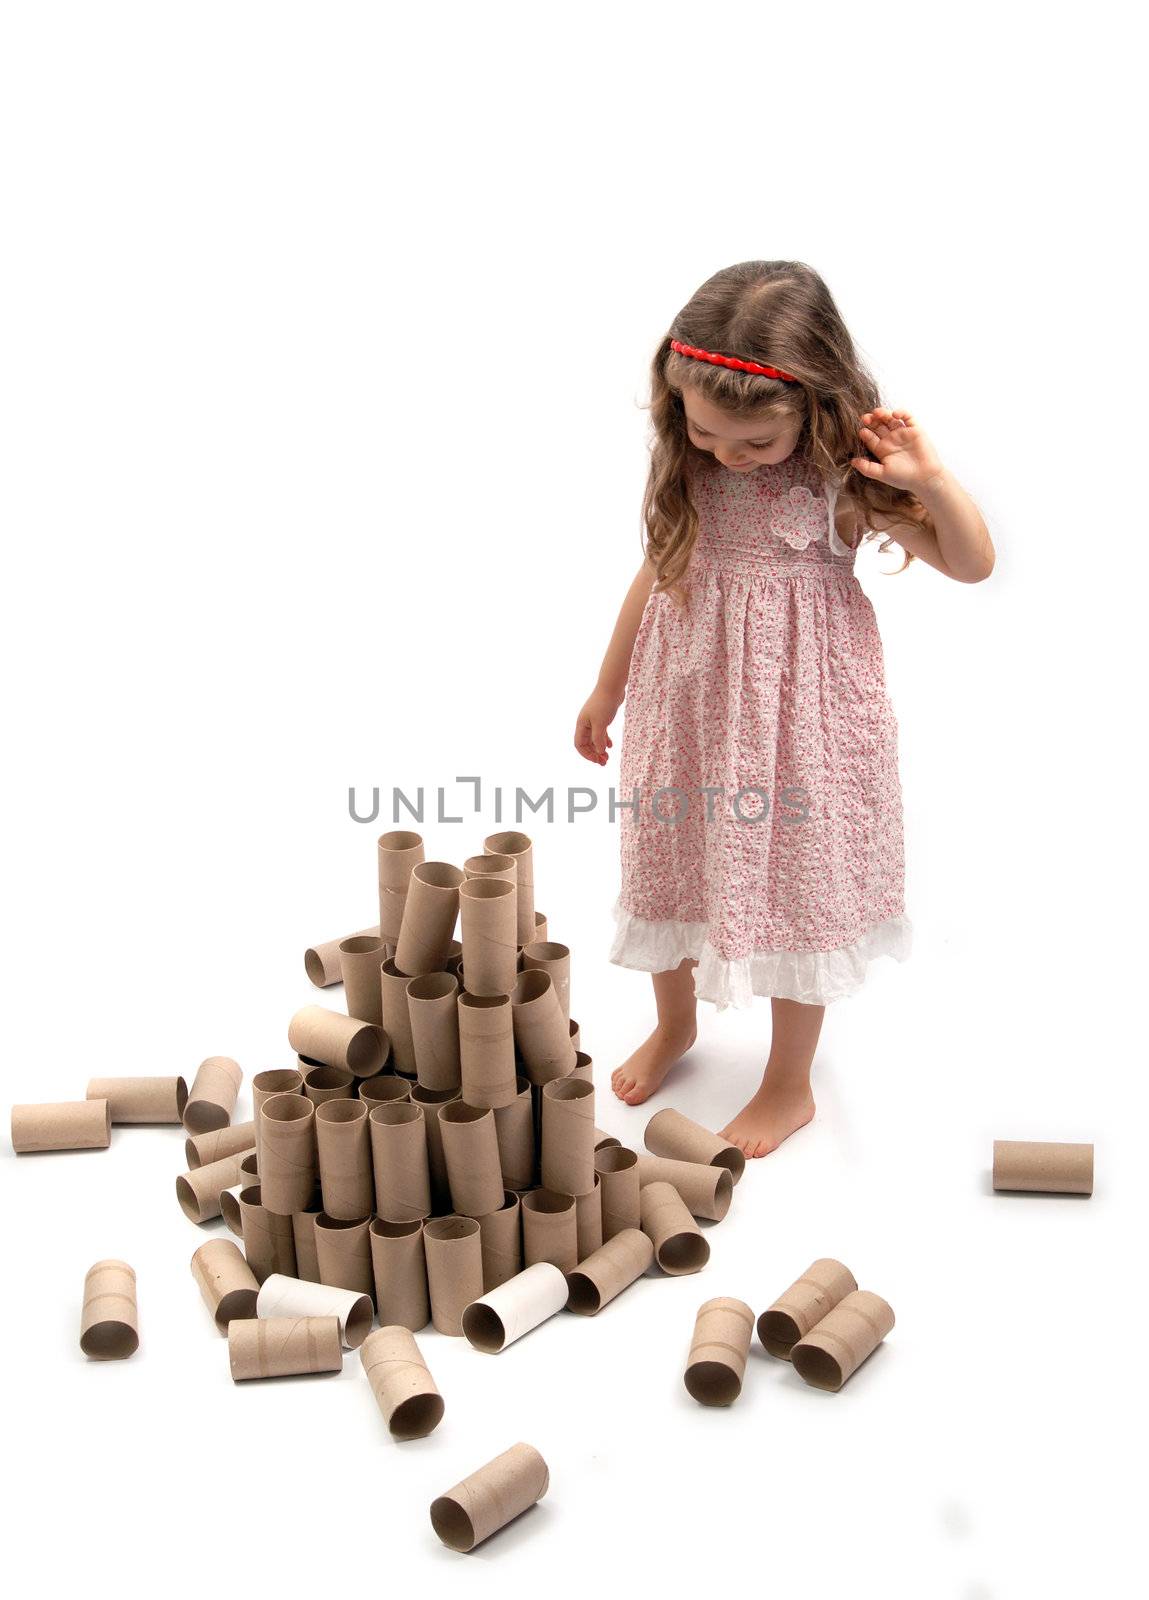 Little girl looking at her fallen Christmas Tree made of paper rolls. White background